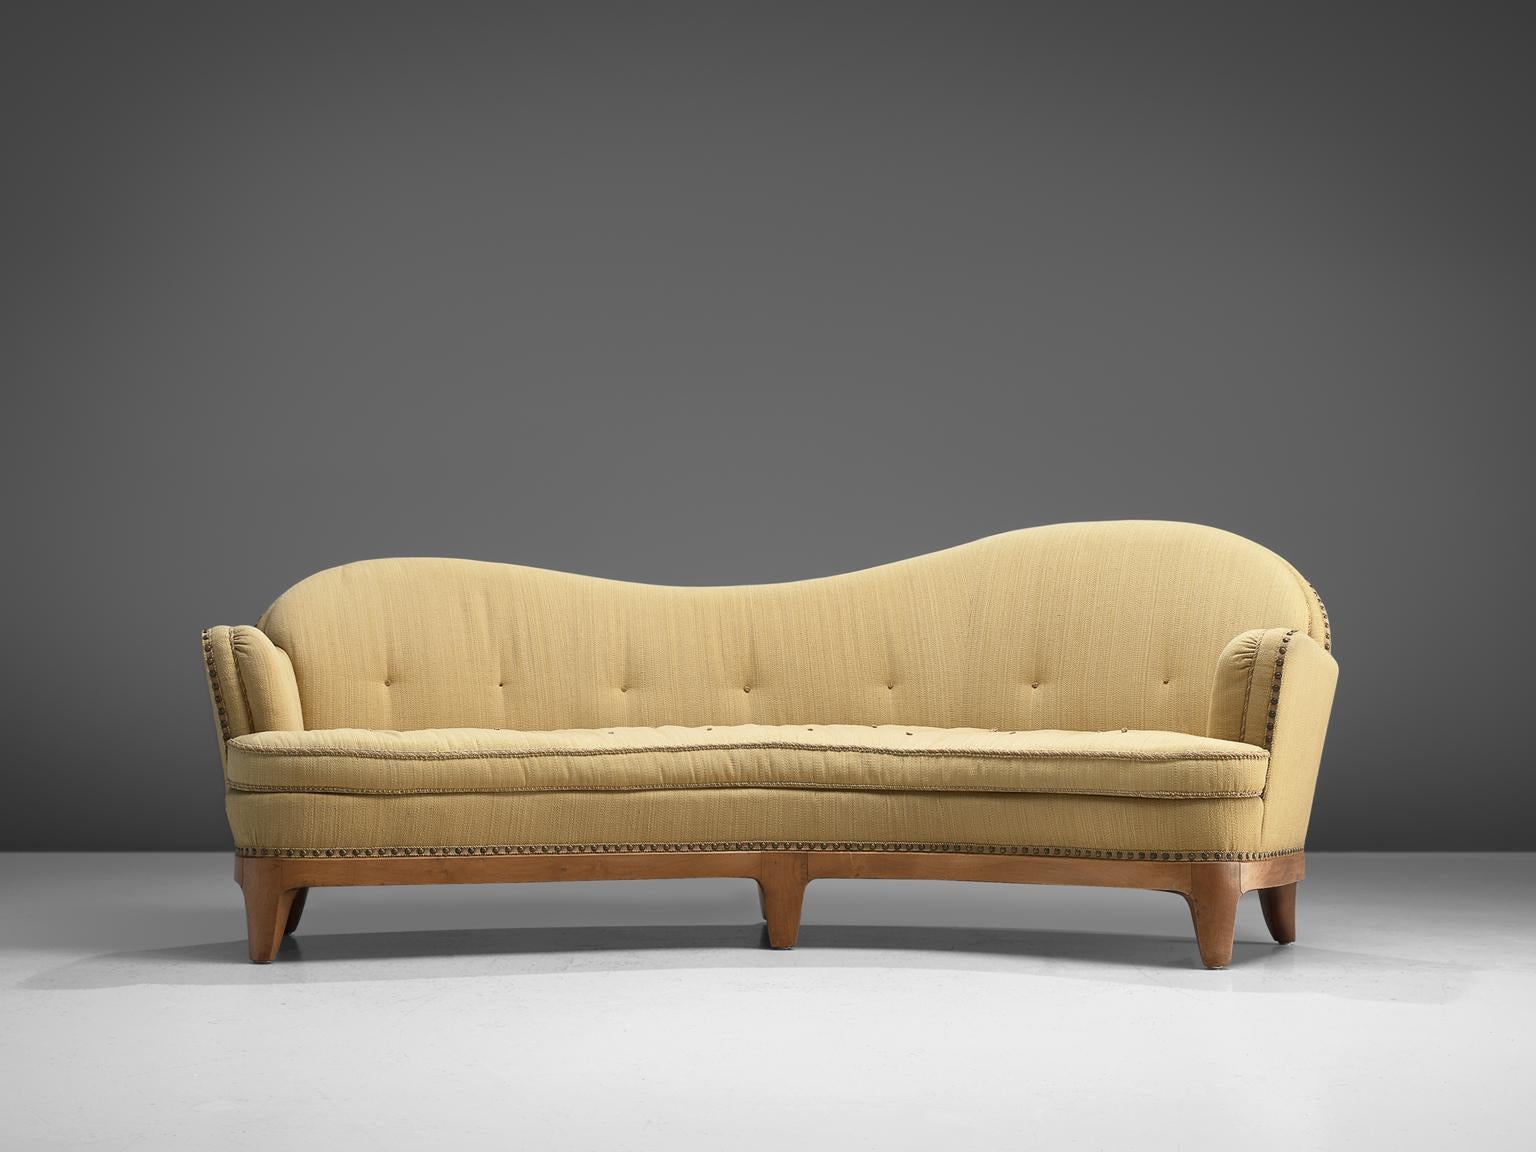 Curved sofa with stained beech frame and beige fabric, France, 1930s.

Extra-ordinary sofa of which we cannot identify its origin after long research. We expect it to be French or Swedish, based on the aesthetic features and materialization. The